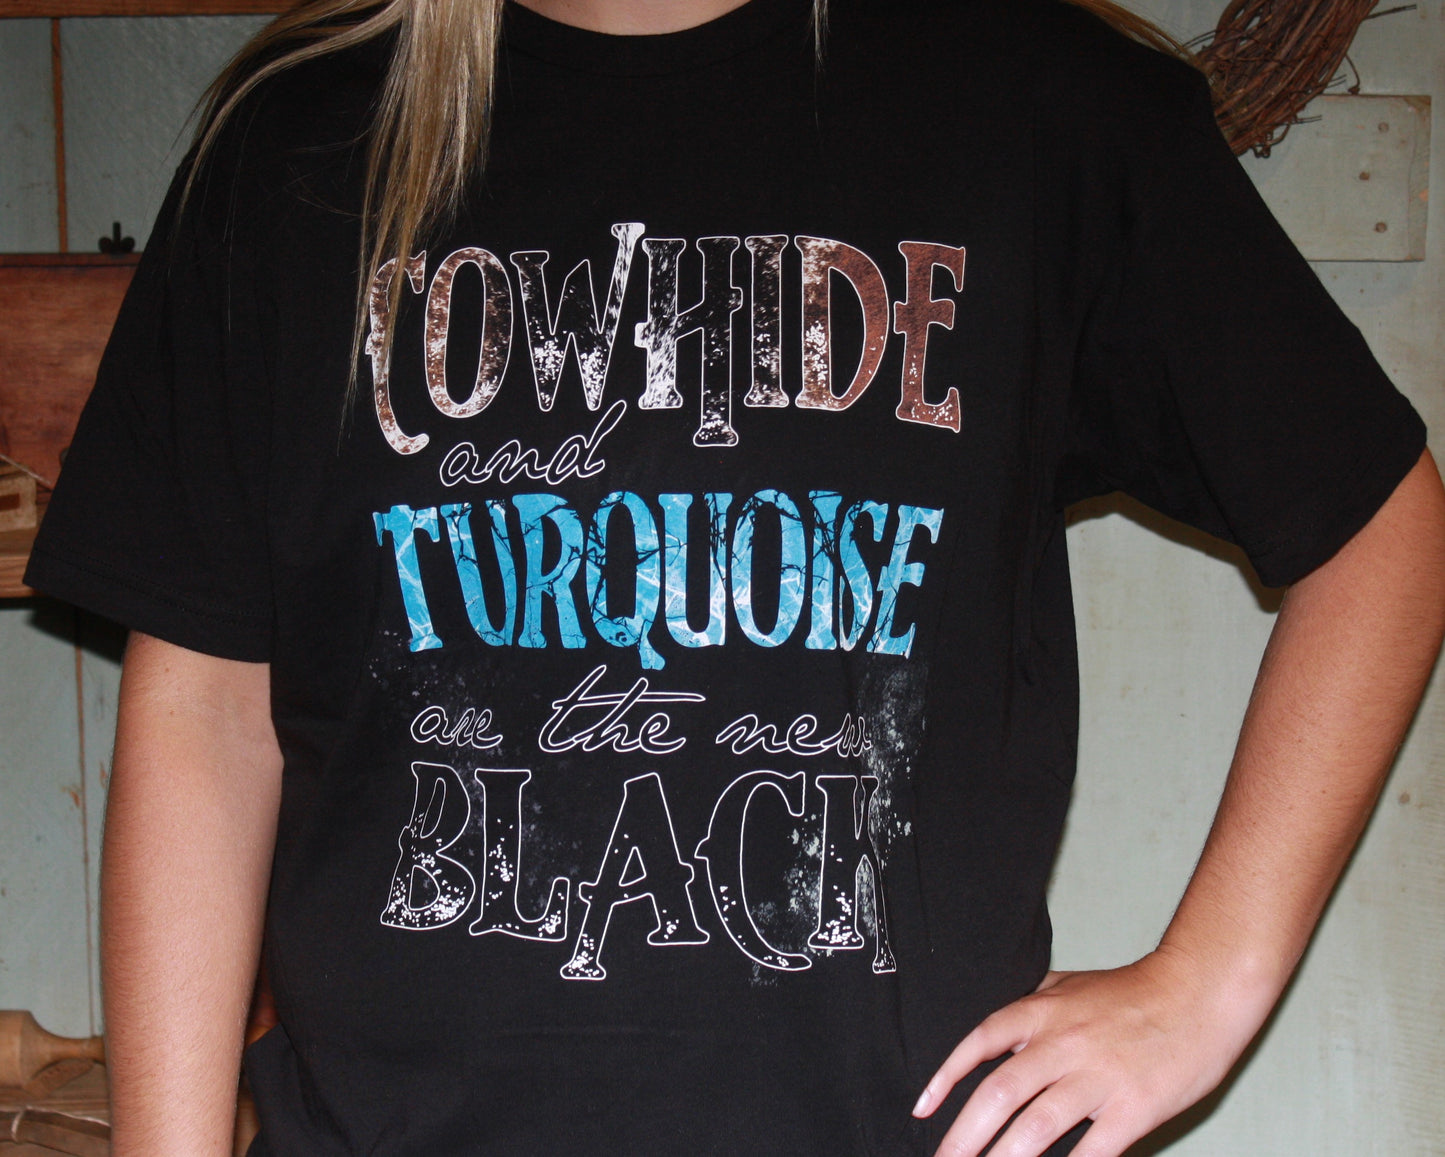 Cowhide & Turquoise is the new black